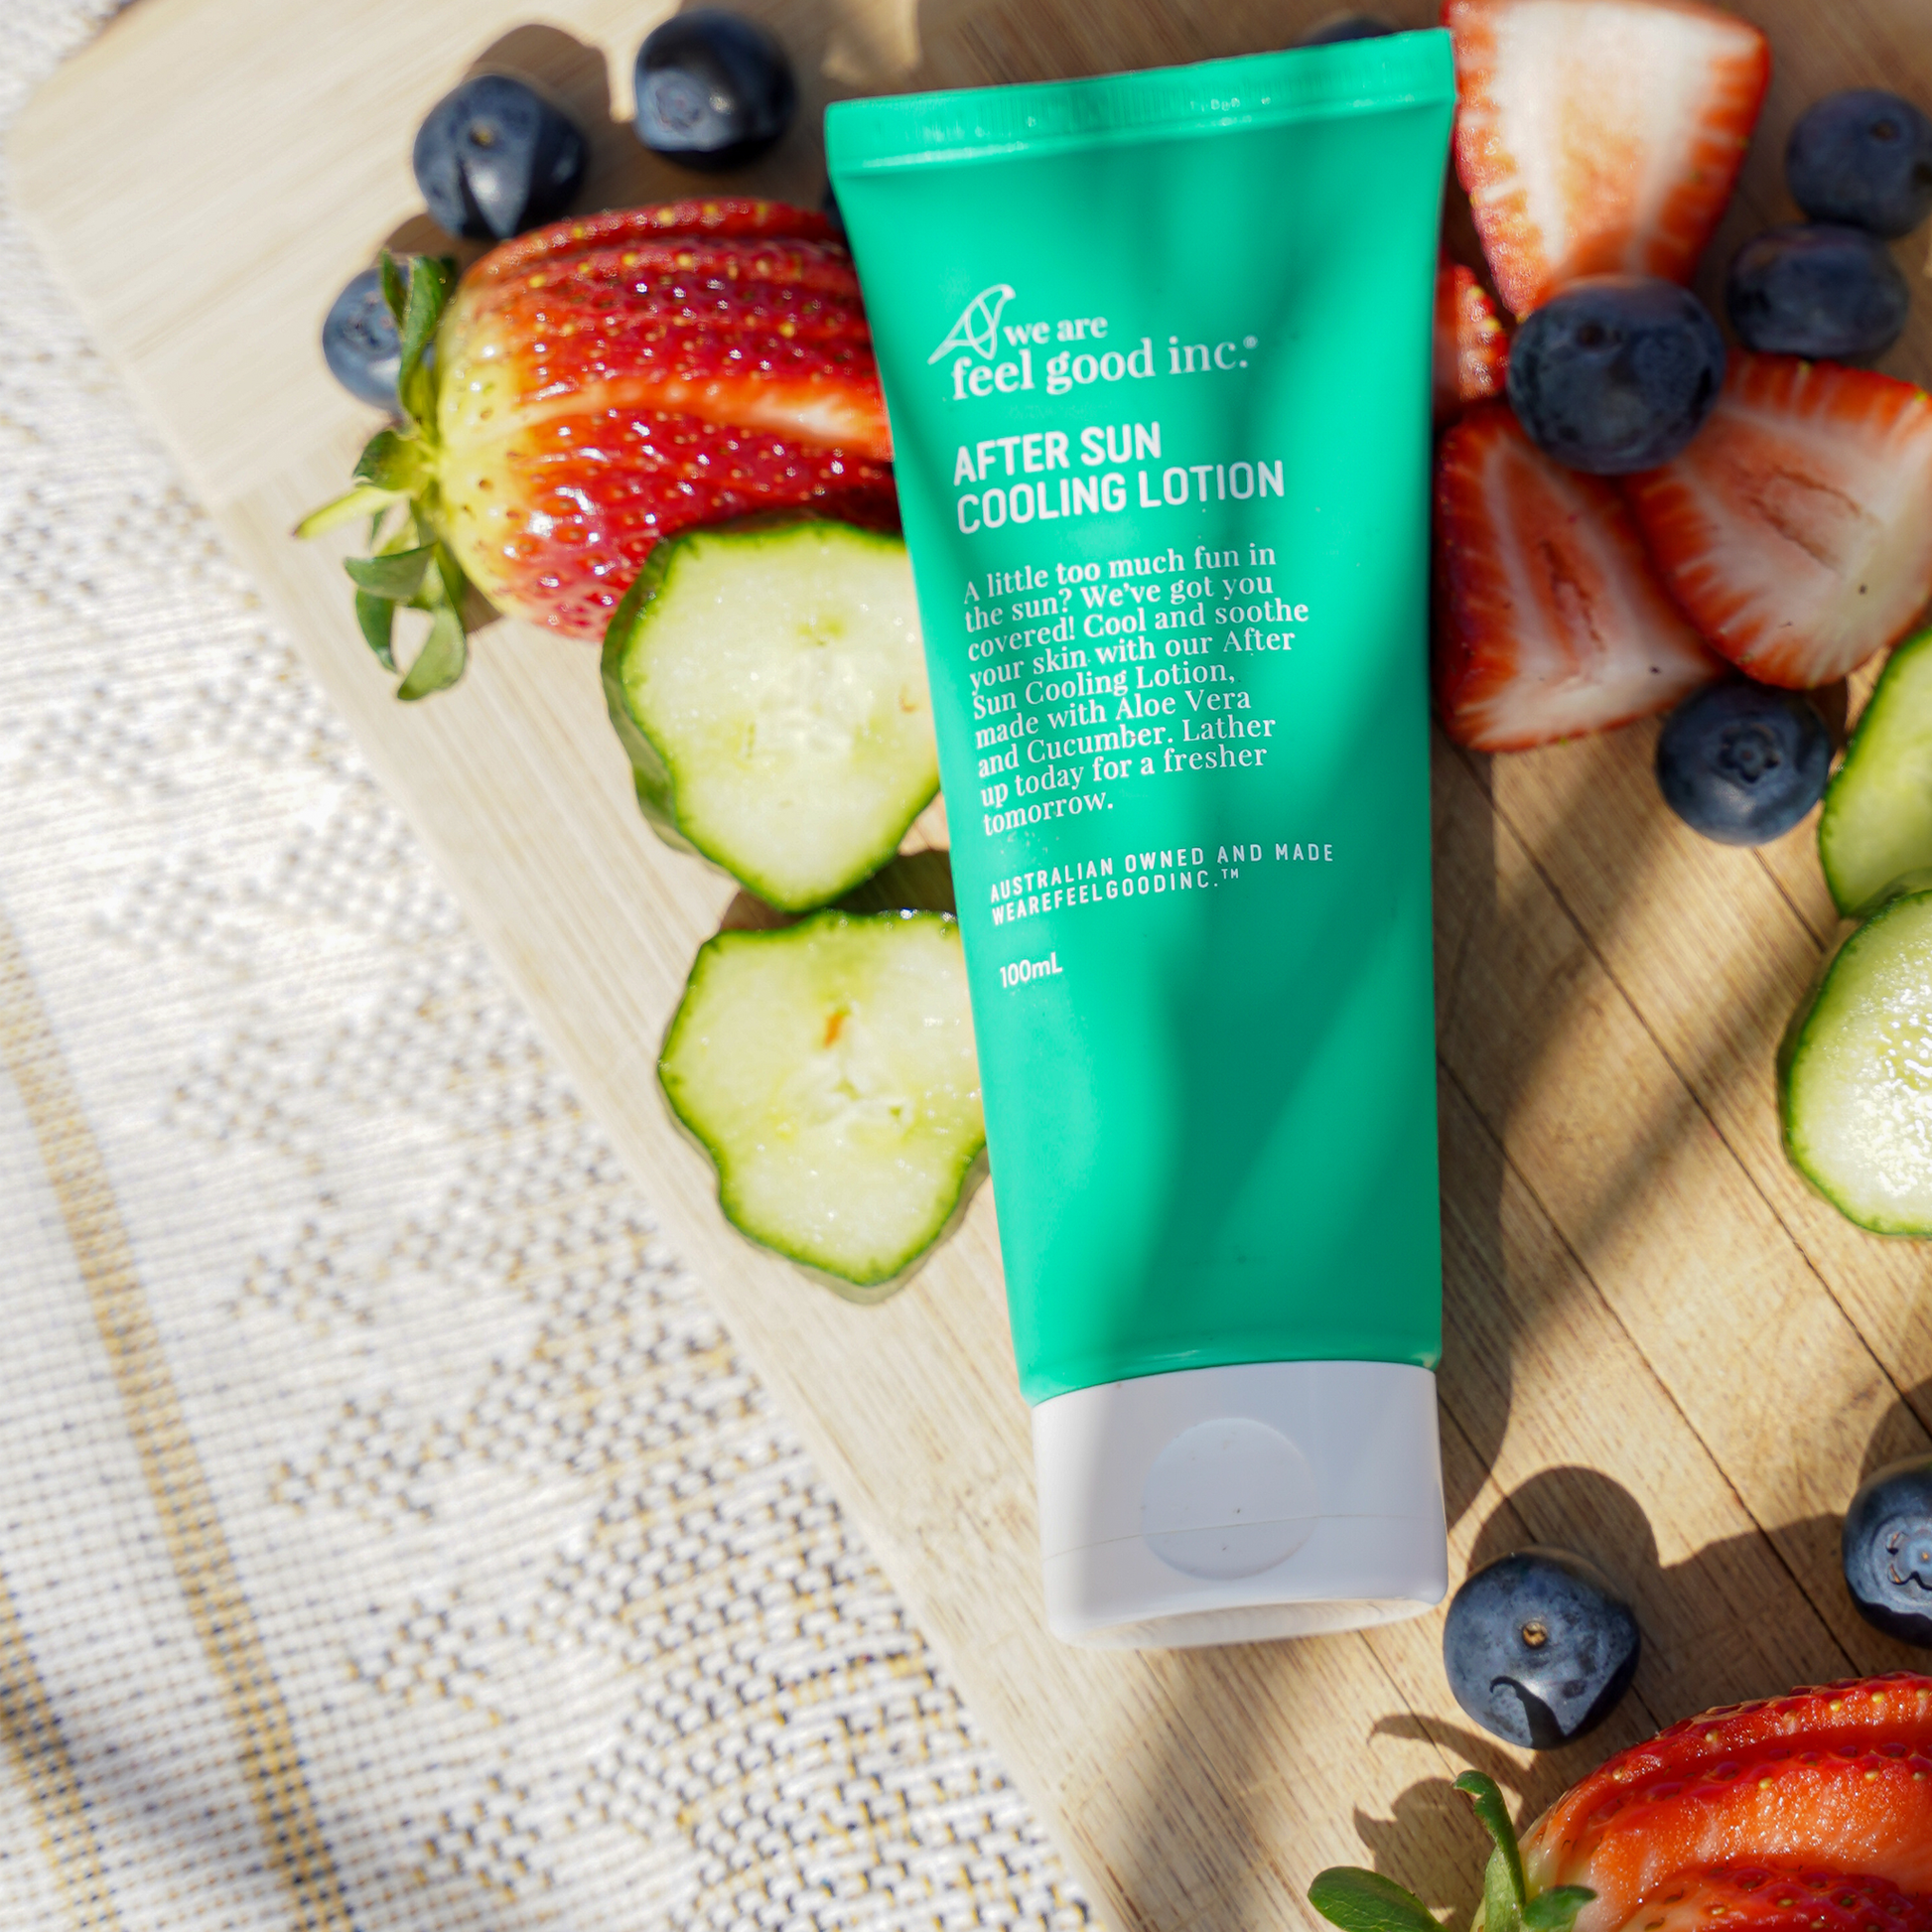 A green tube of 'We Are Feel Good Inc. After Sun Cooling Lotion' is displayed alongside fresh strawberries, blueberries, and cucumber slices on a sunny wooden surface